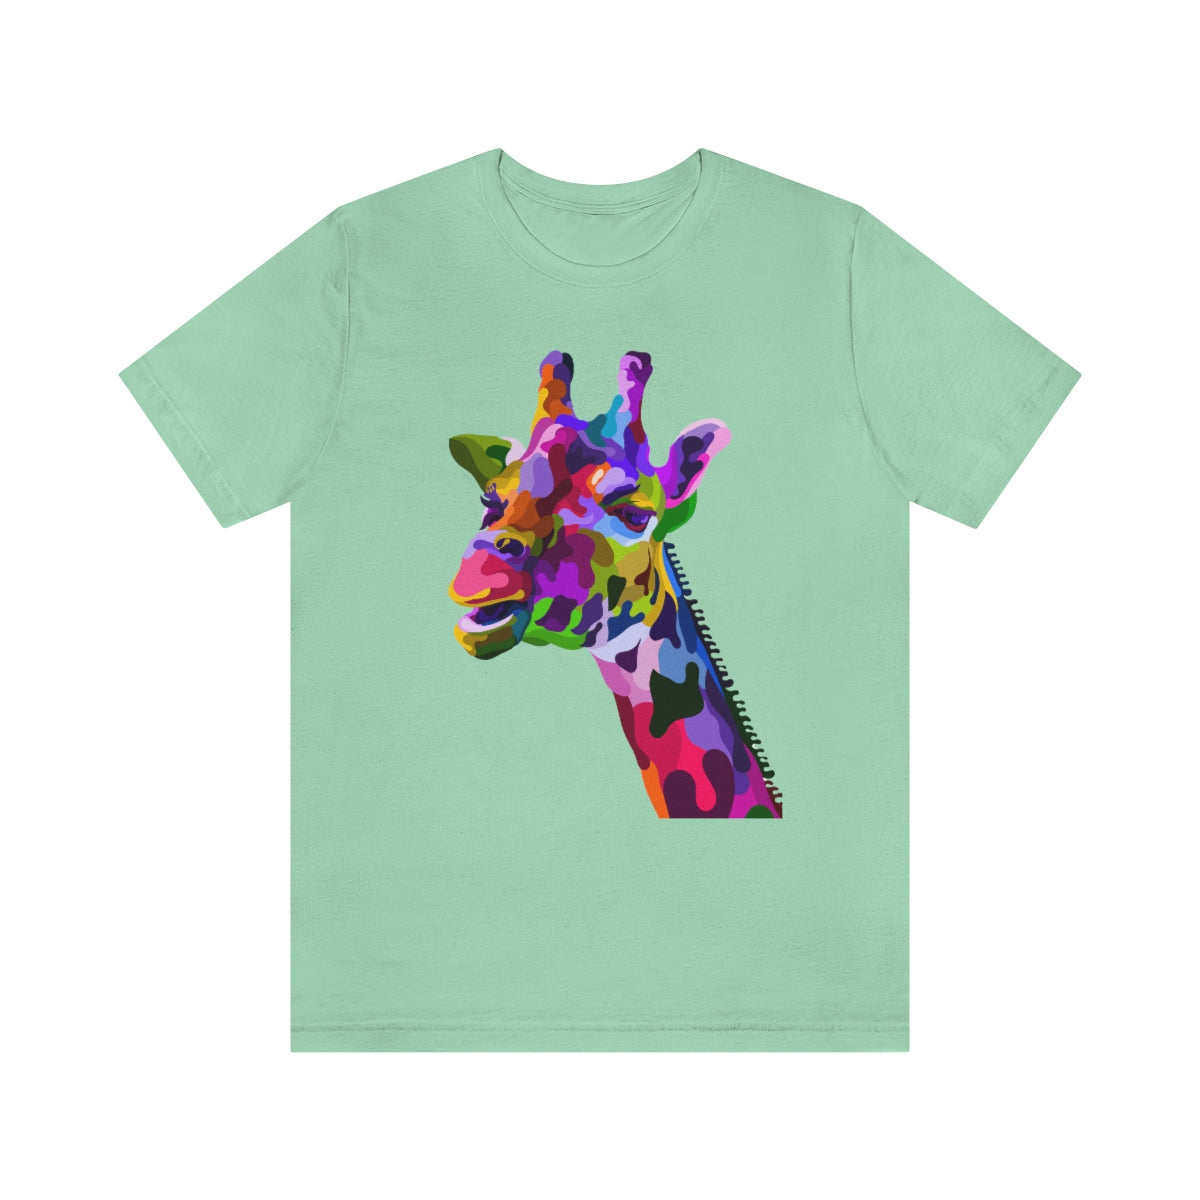 Unisex Jersey Short Sleeve Tee "Abstract colorful geraffe"